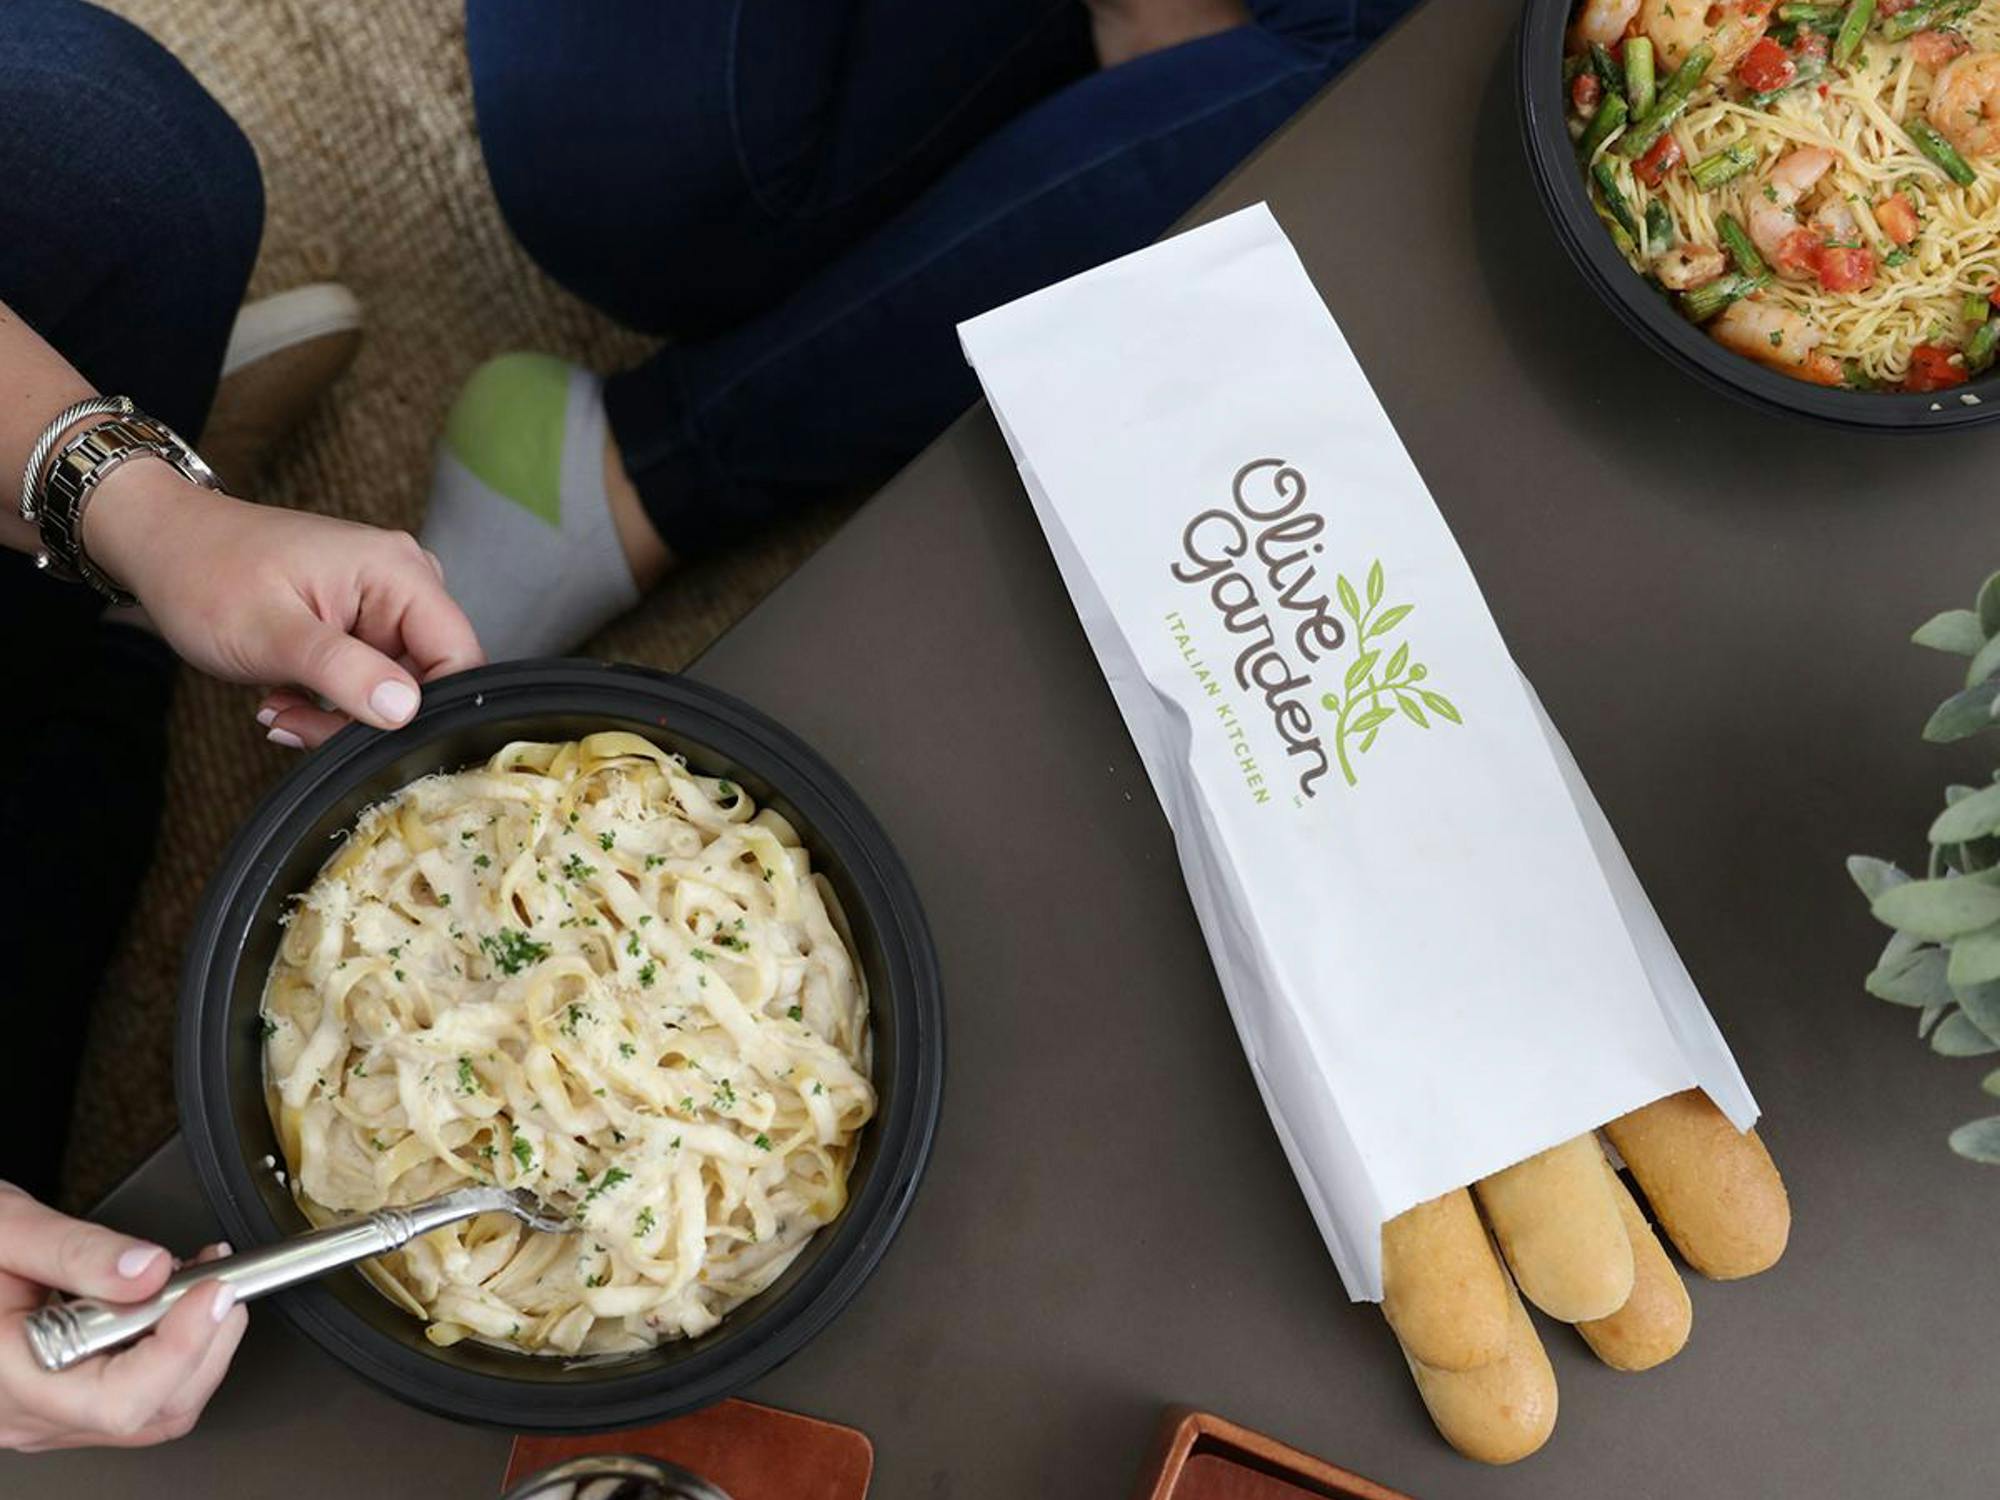 Two people sitting at home enjoying some Take Home Entrees from Olive Garden with breadsticks